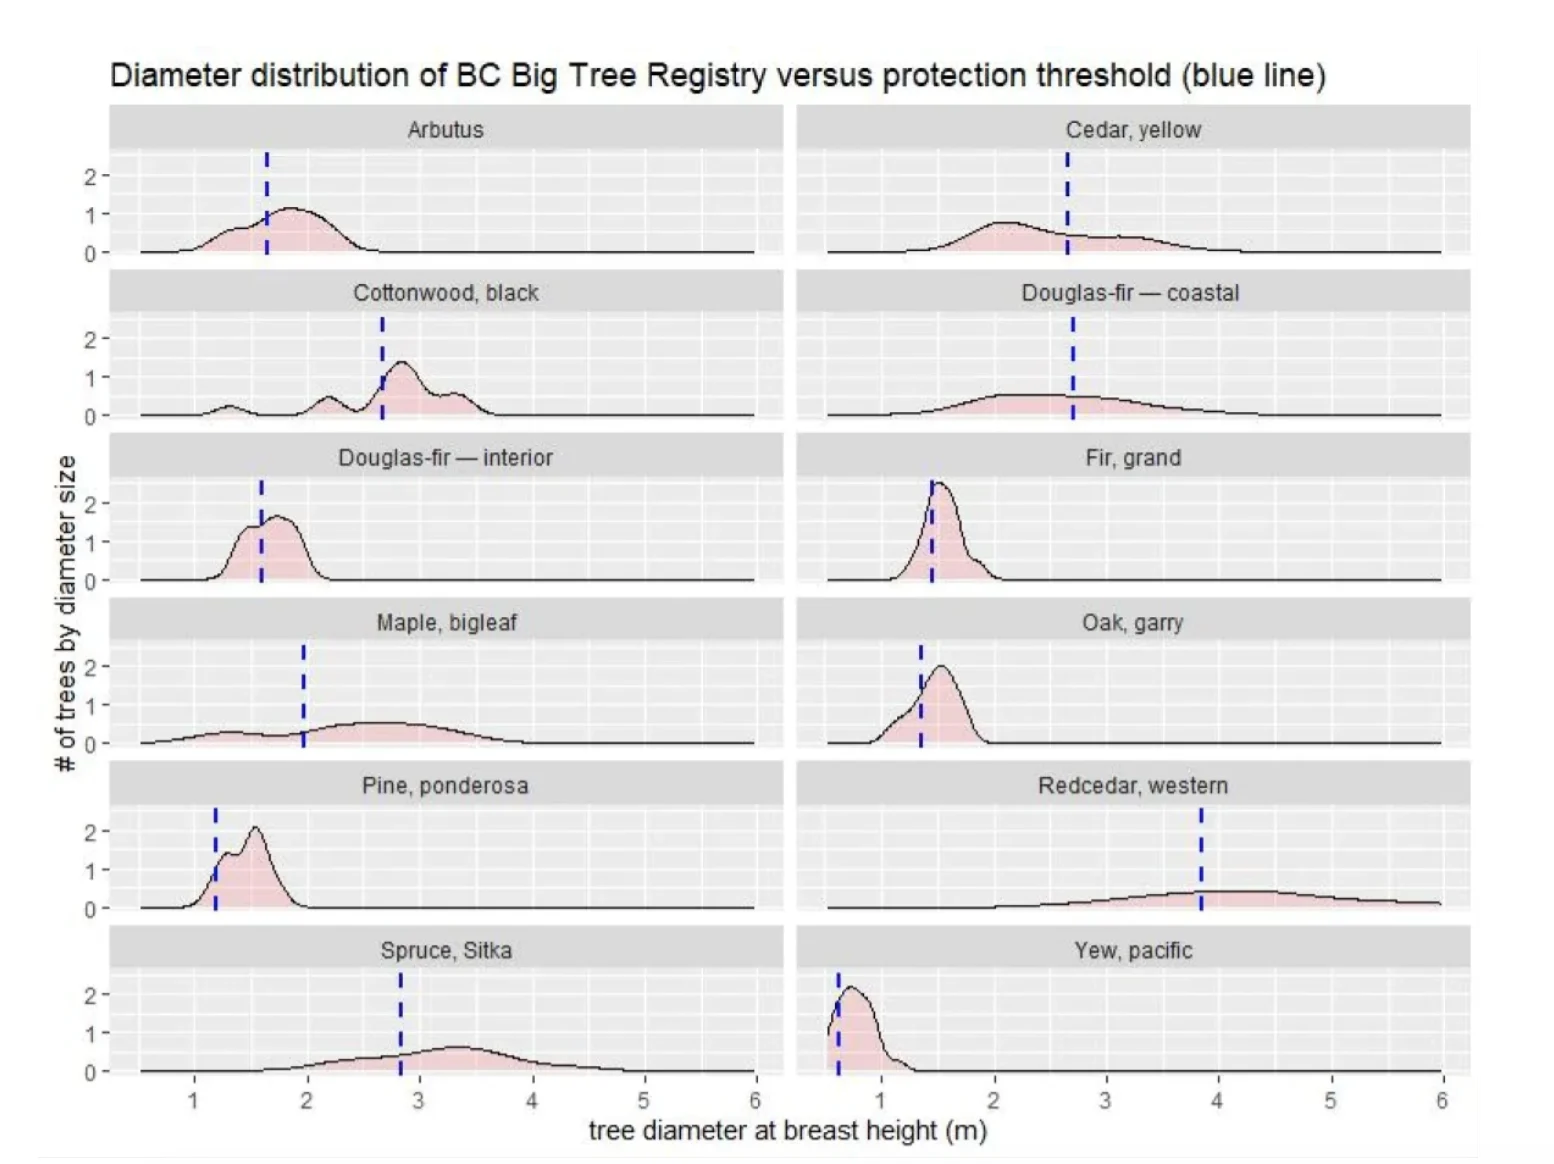 Only the very largest trees of 12 species are protected under the B.C. Special Tree Regulation put in place in 2020. This figure illustrates that many of the largest known trees in the province would be too small to receive protection. This graph tallies trees listed on UBC's Big Tree Registry, a list of the largest known trees in the province nominated by citizens and verified by experts. . (Ira Sutherland/UBC Forestry Program)